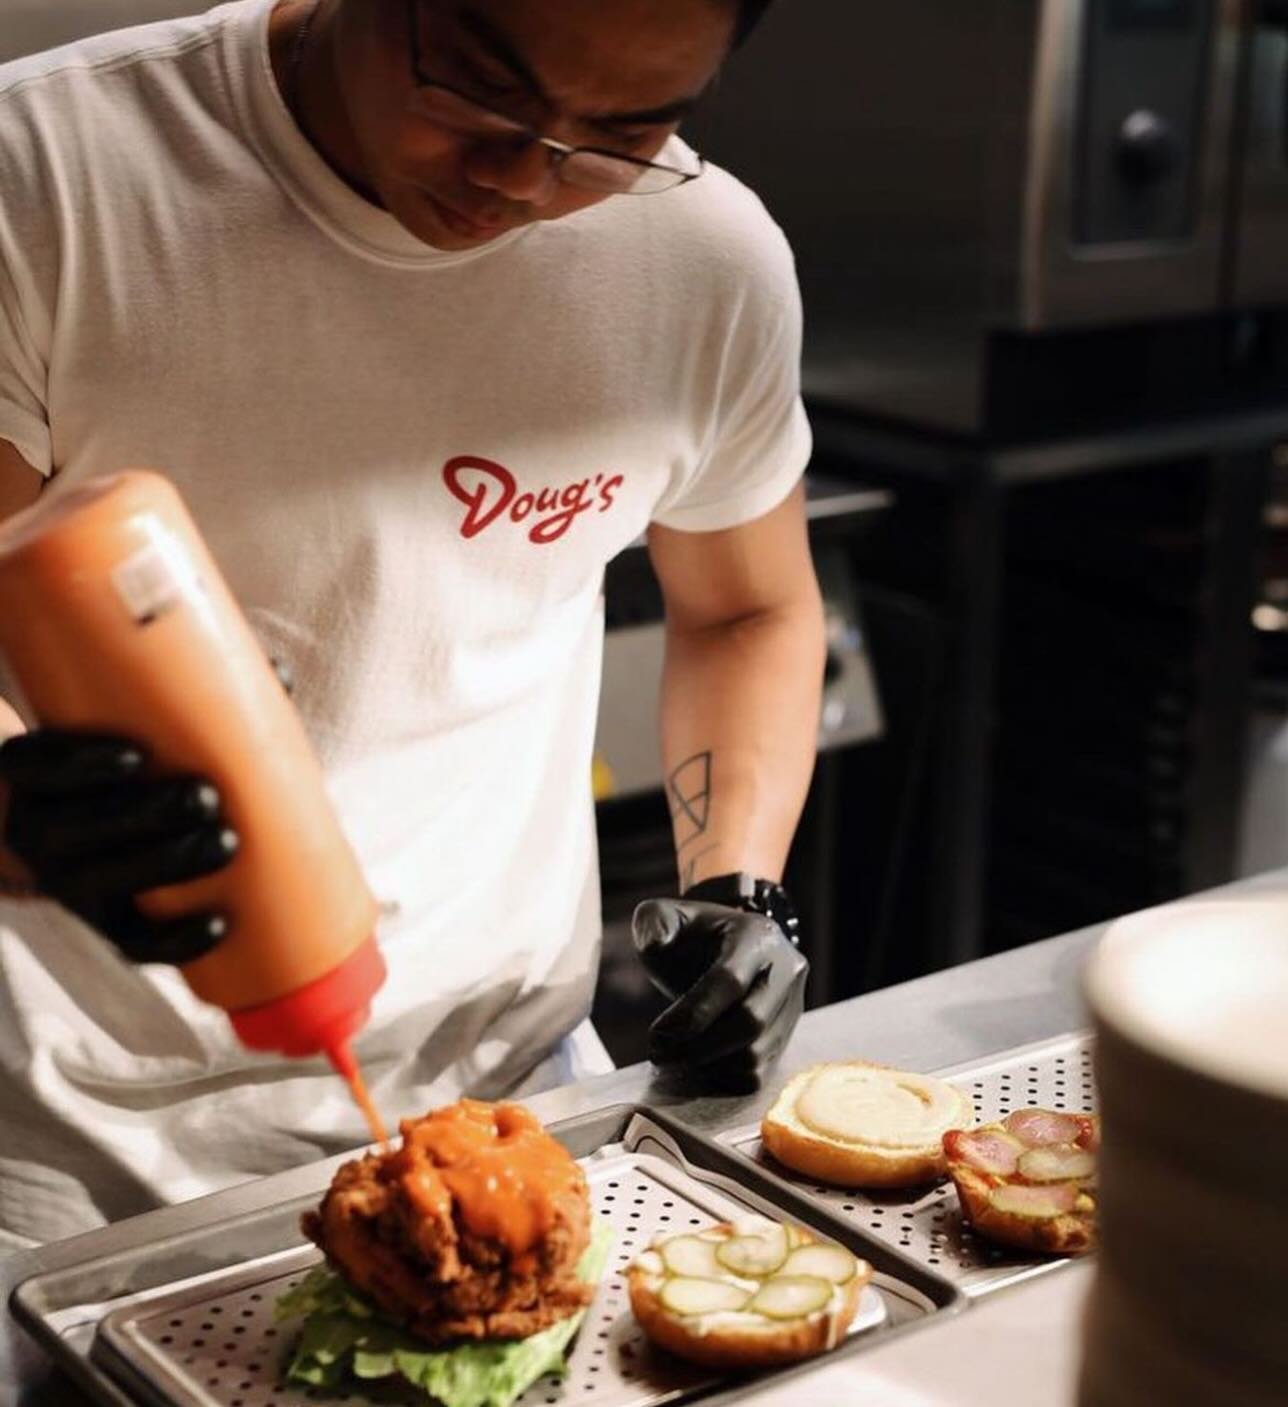 Doug&rsquo;s is hiring! We have big plans for this year, with a new site opening in a couple of months and lots of opportunities for chefs of all levels! Send us a message if you&rsquo;re interesting in joining one of the best burger shops in Oslo! ?